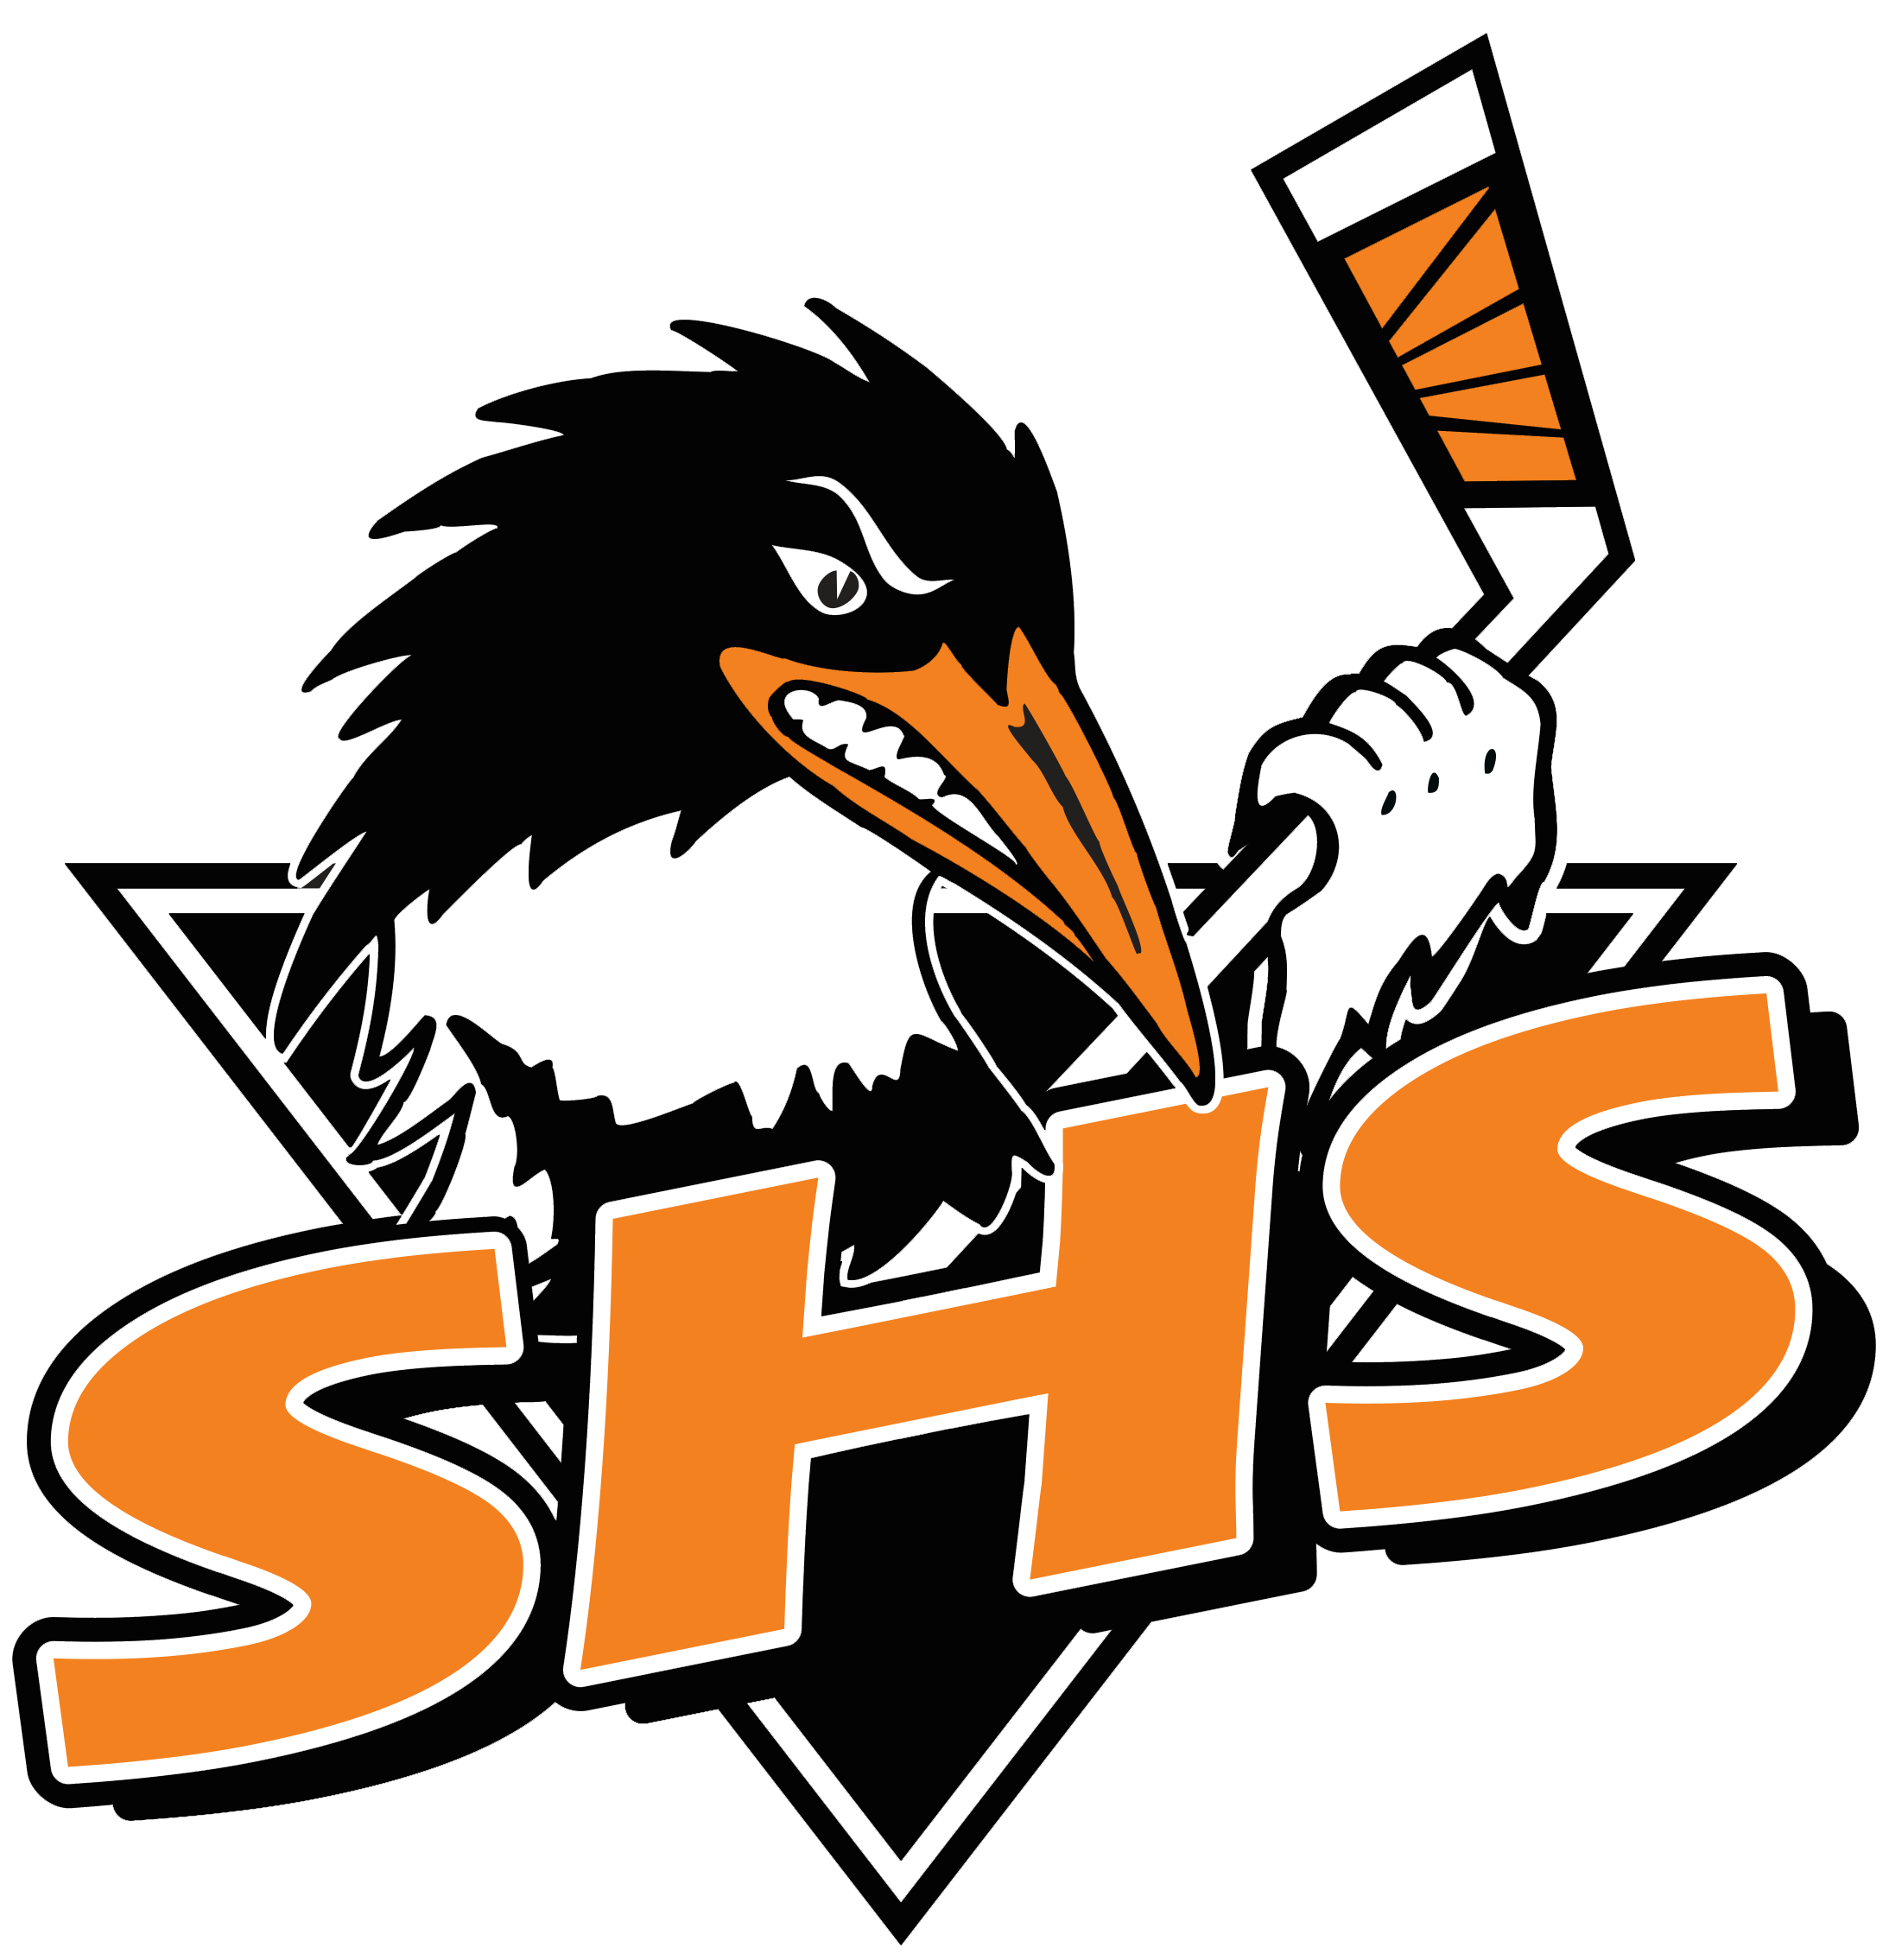 SHS Hockey Team Logo (Conflicted copy from ALCAMSPC on 2018-09-11)